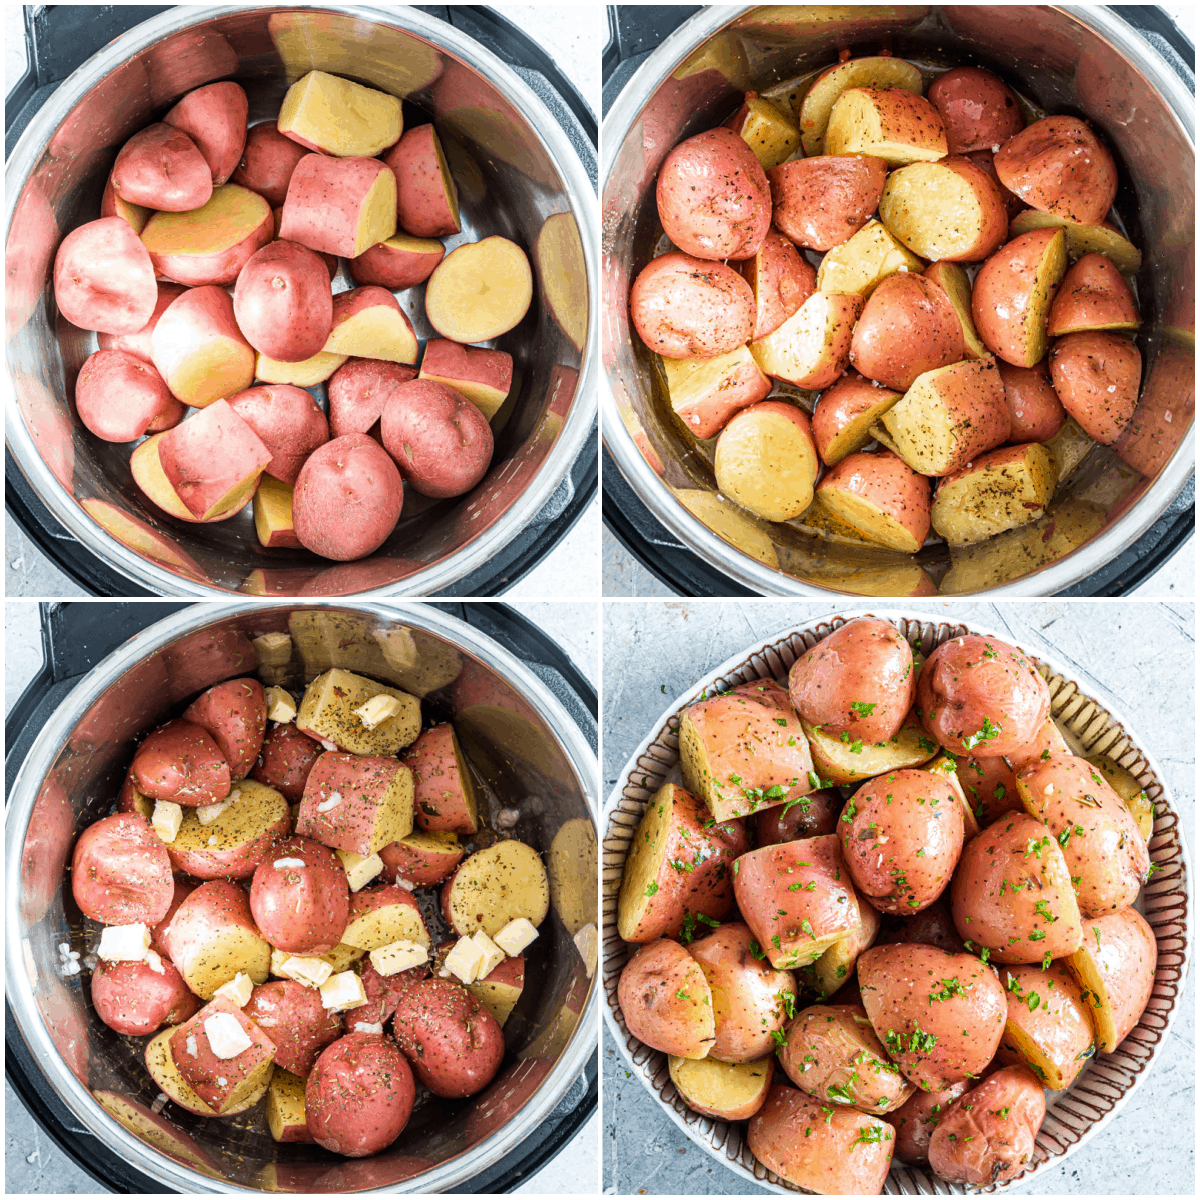 image collage showing the steps for making garlic butter instant pot red potatoes